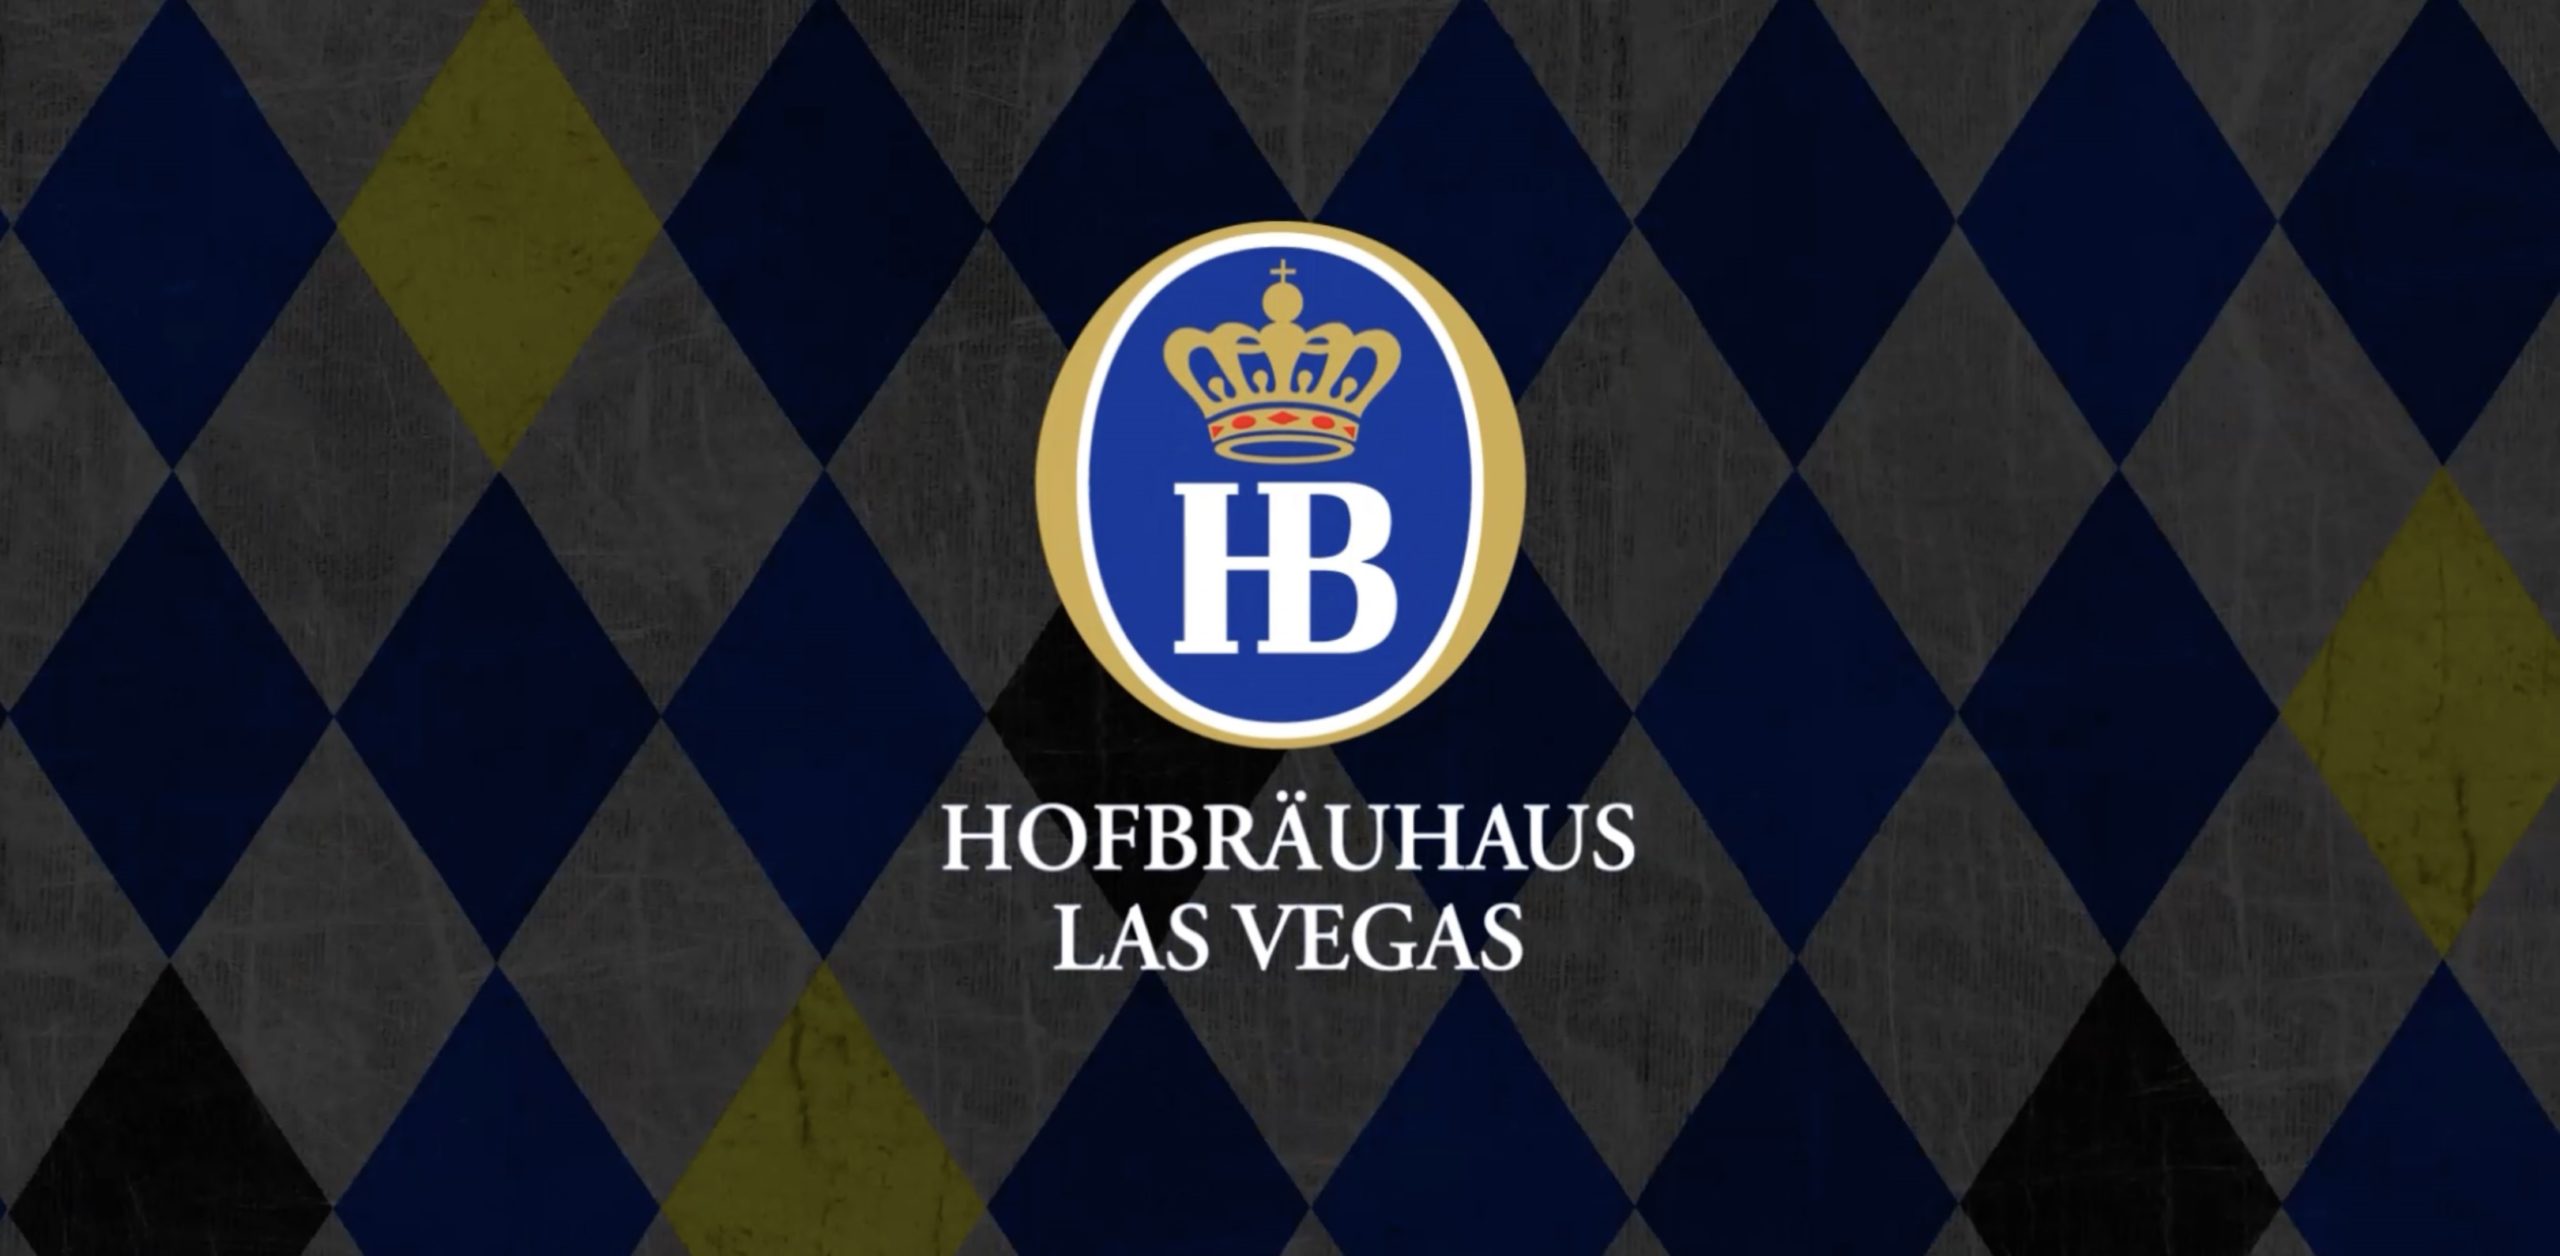 Hofbräuhaus Las Vegas - Happy Thanksgiving 🍁🦃 from our Haus to